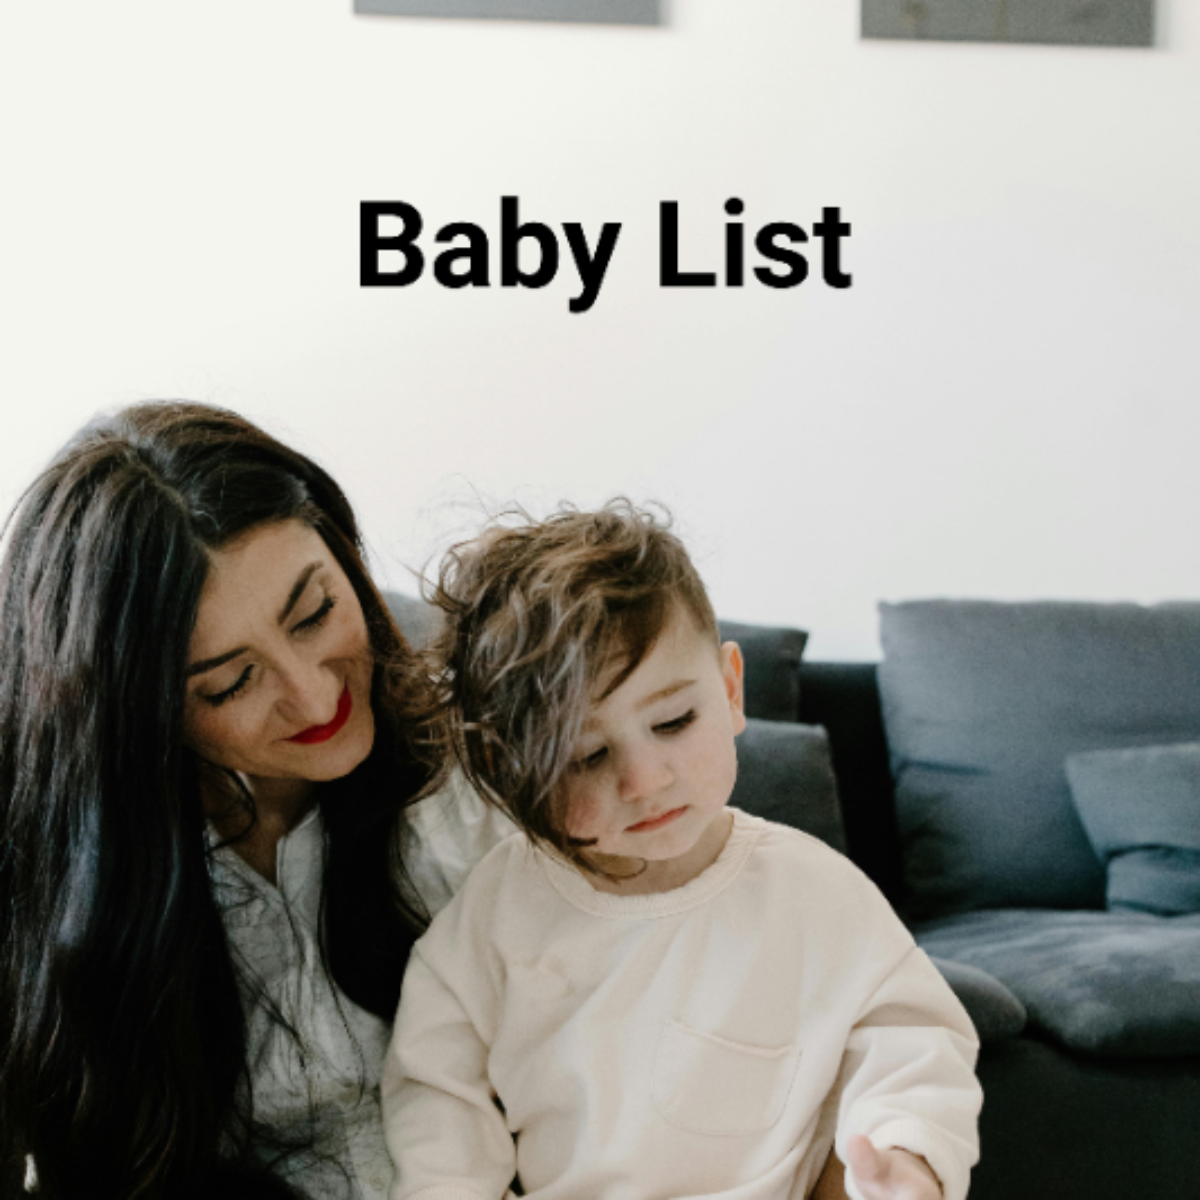 Baby List Template